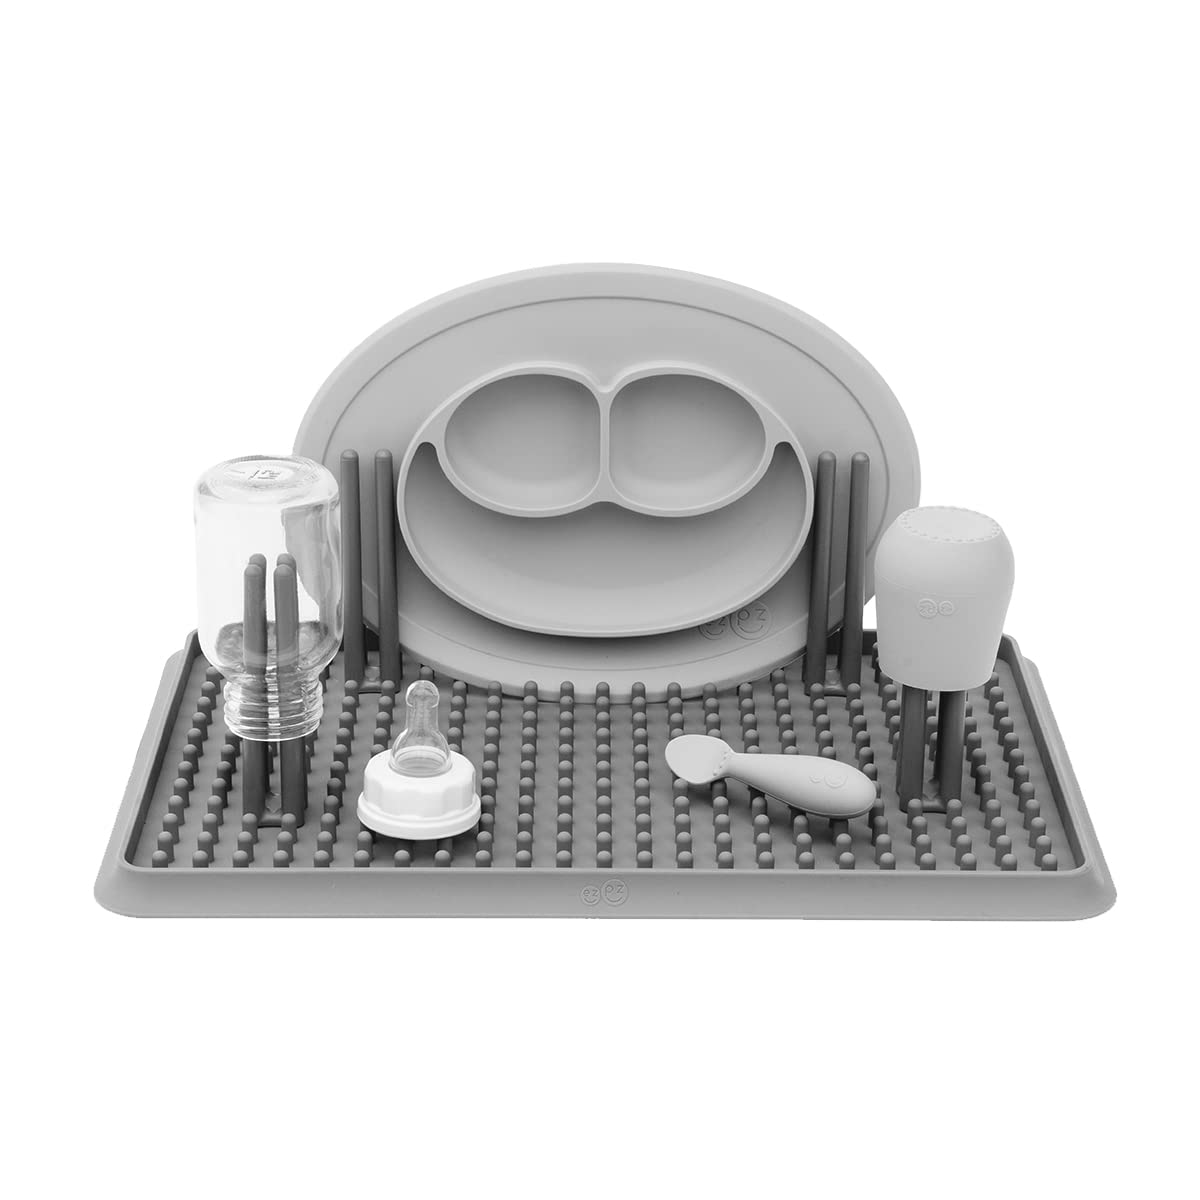  ezpz Tiny Collection Set (Gray) - 100% Silicone Cup